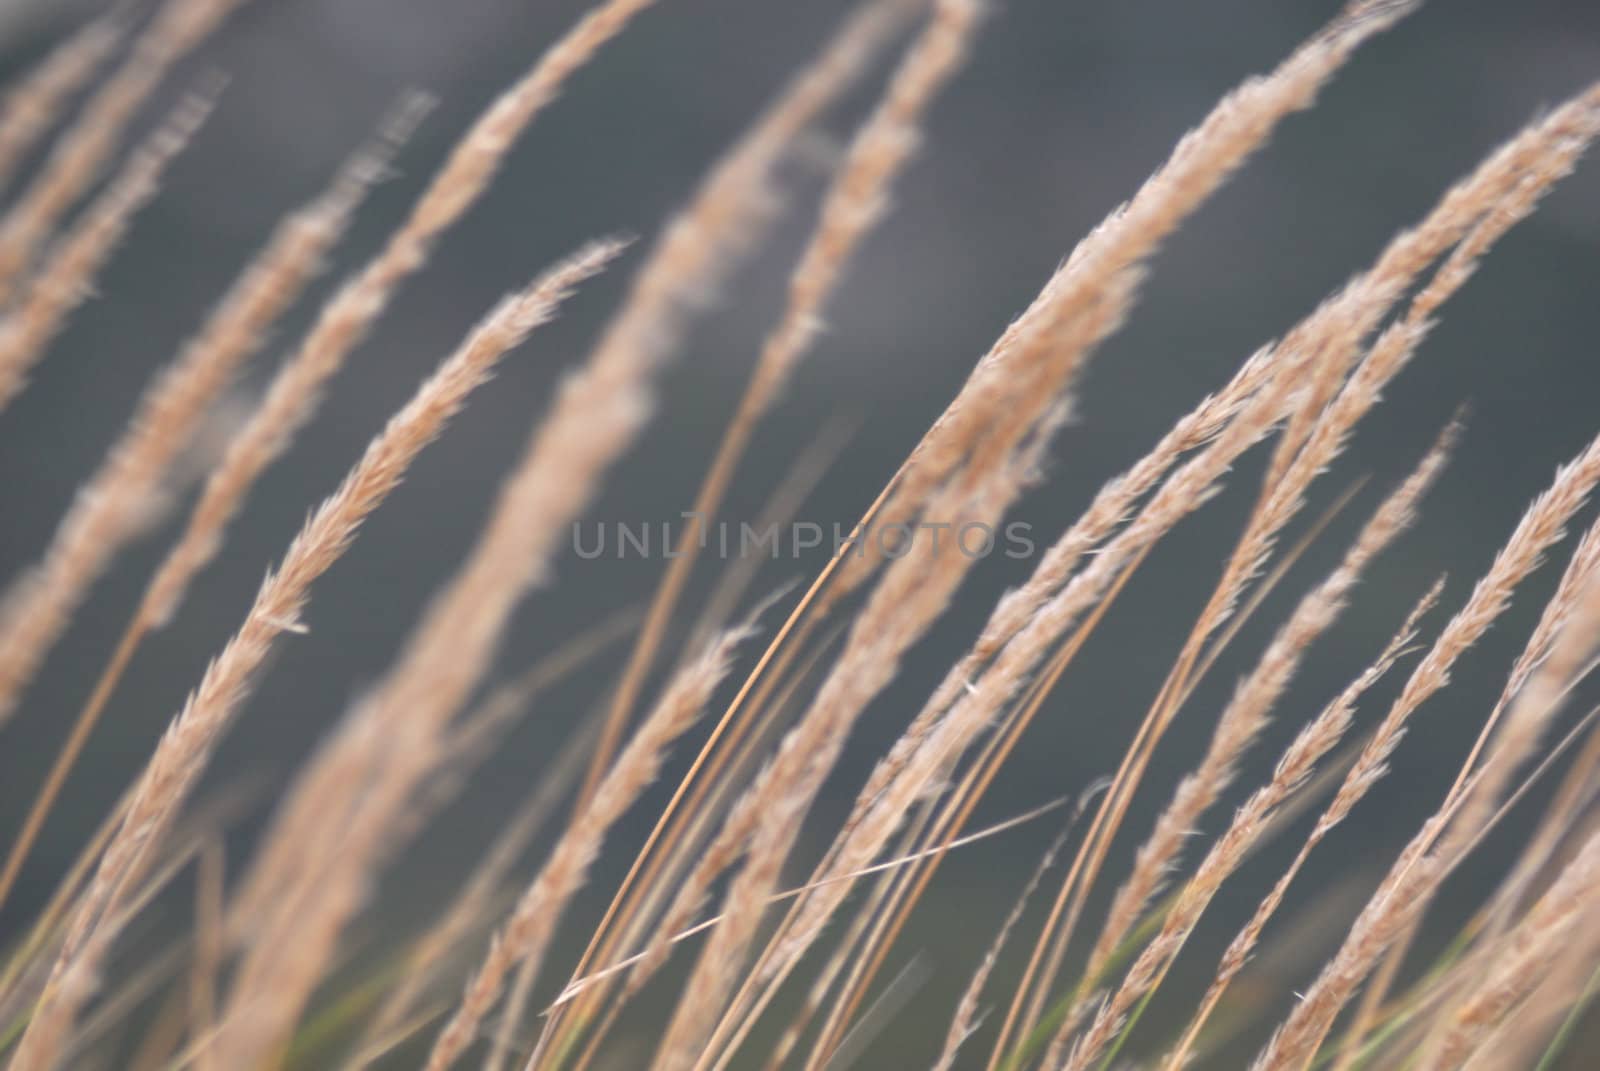 Tight composition of reeds showing movement.